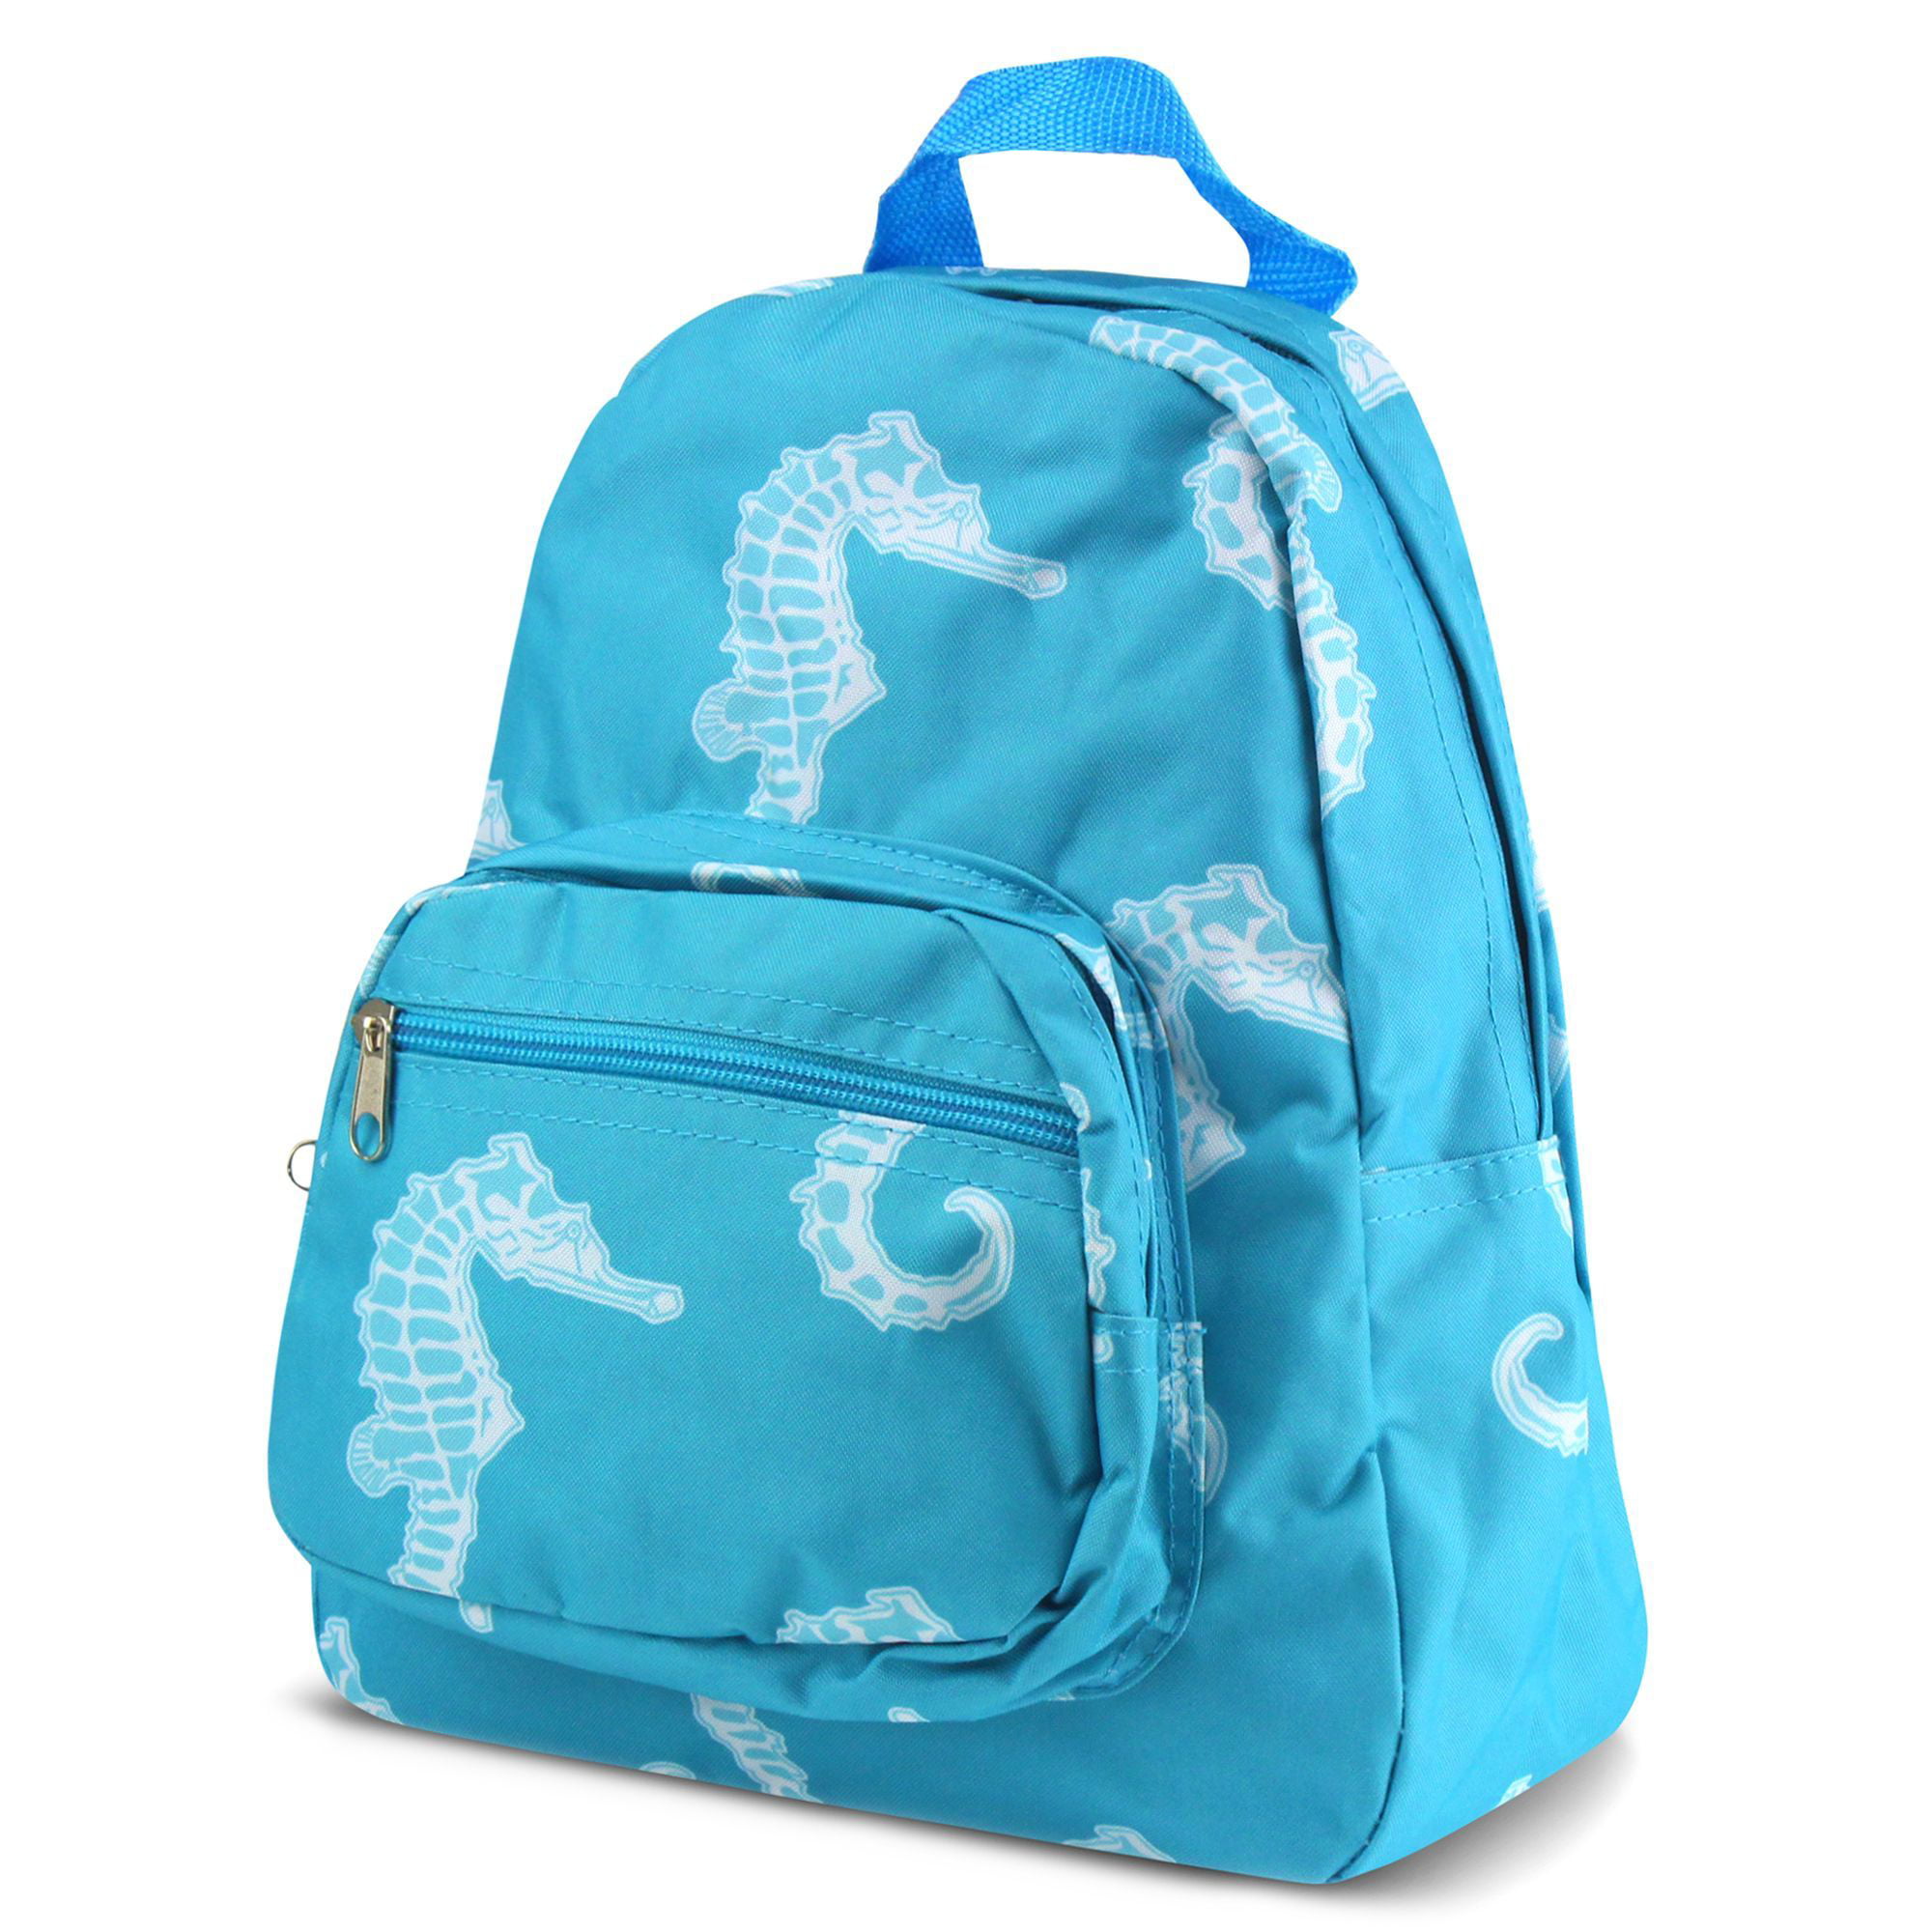 Kids Small Backpack by Zodaca Bright Stylish Outdoor Shoulder School ...